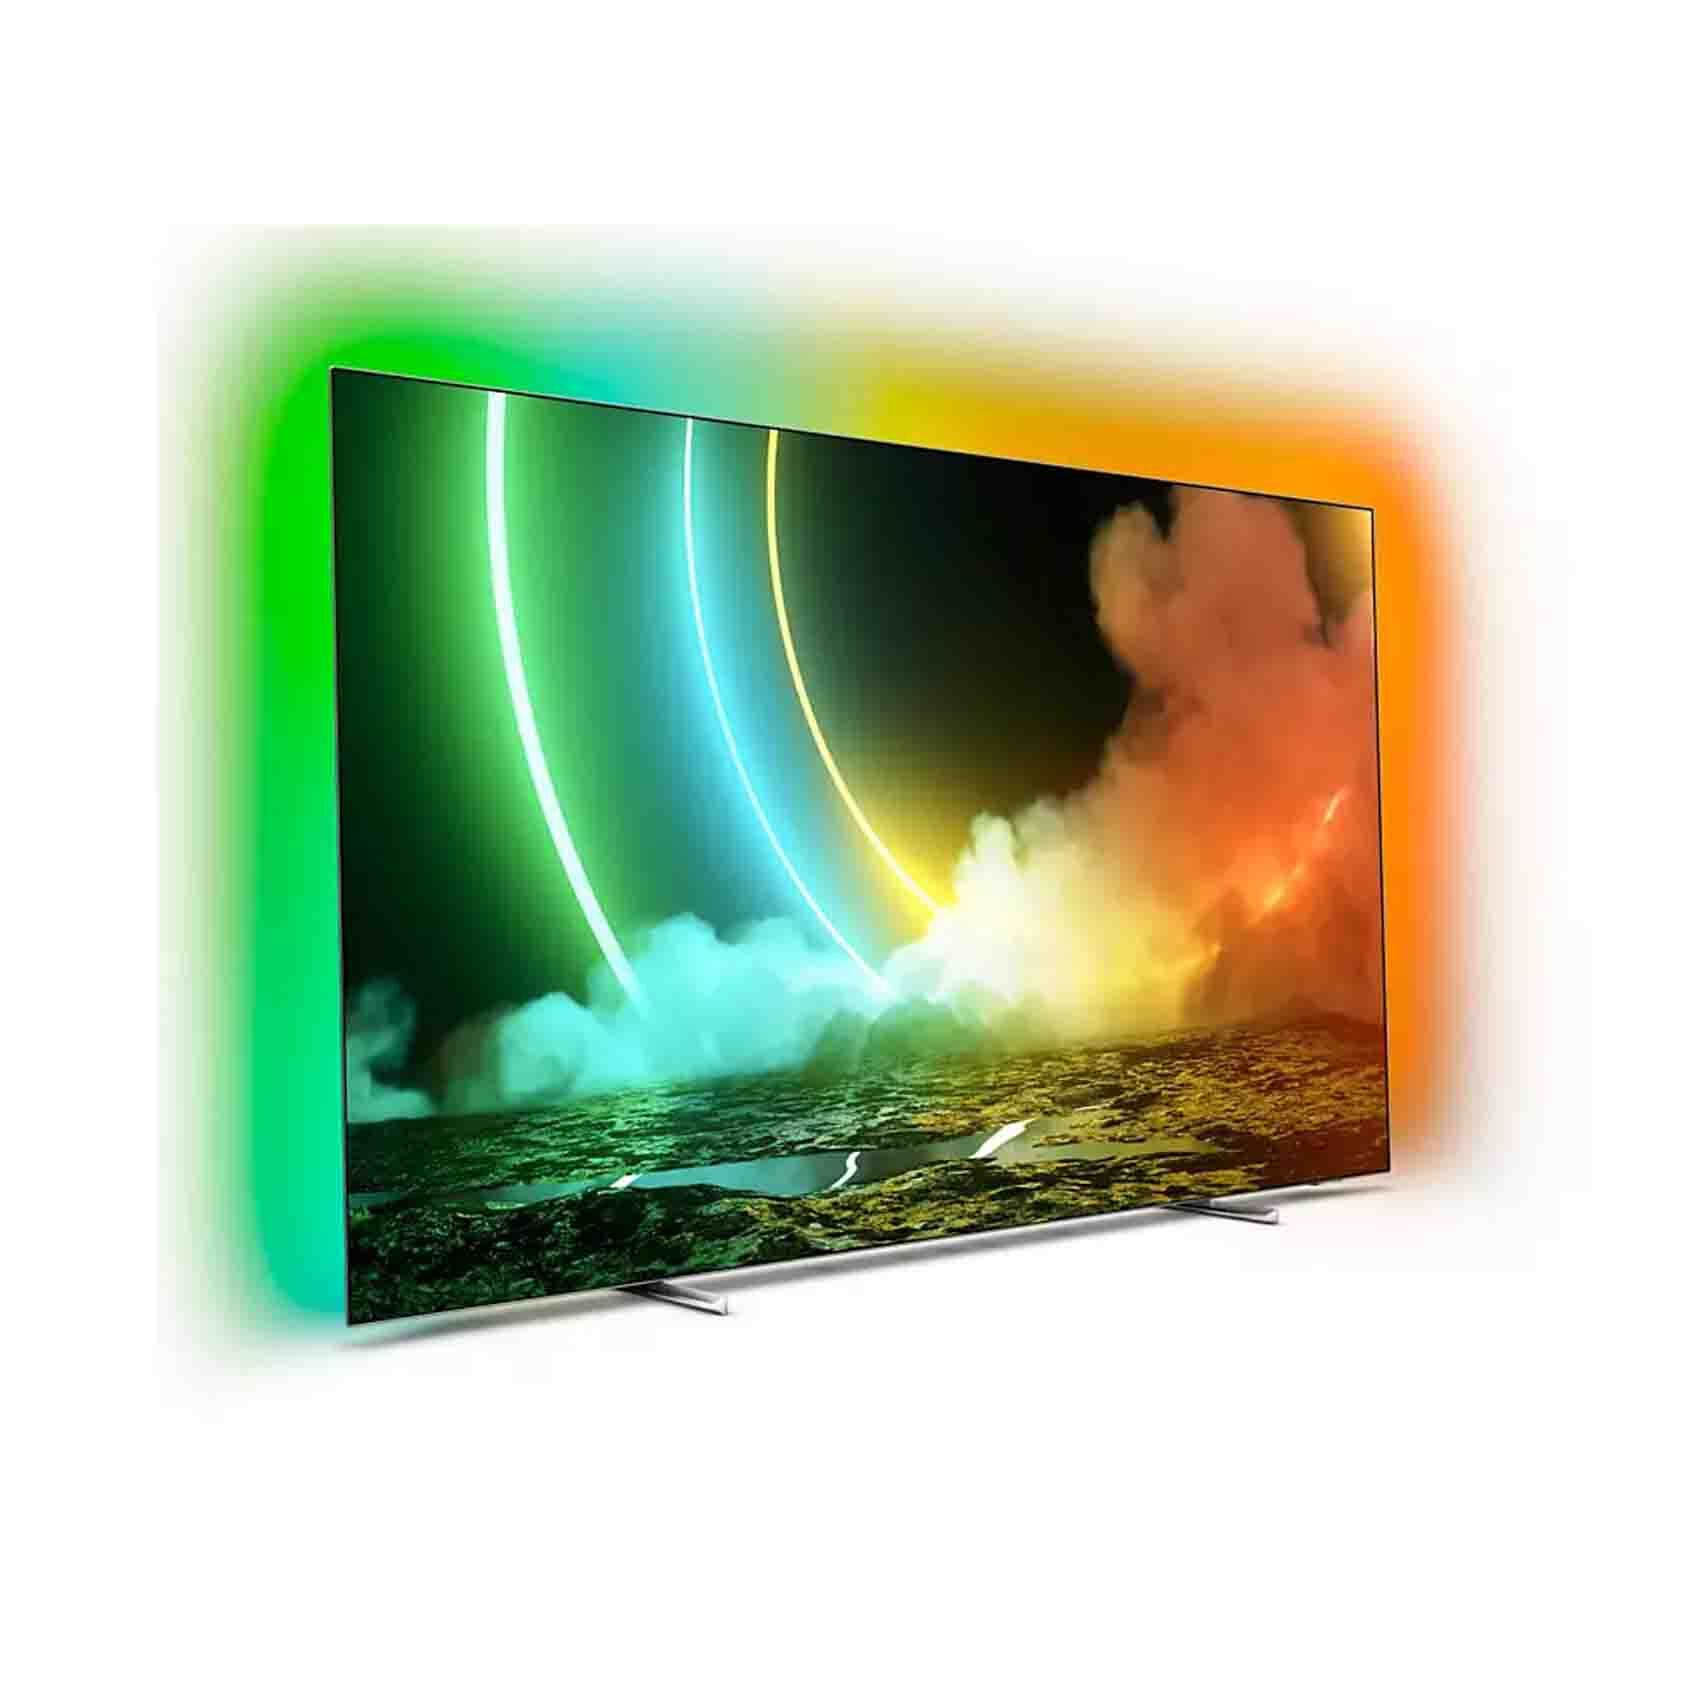 Philips 75 Inch 4K UHD LED Android 3-sided Ambilight TV, 75PUT8507